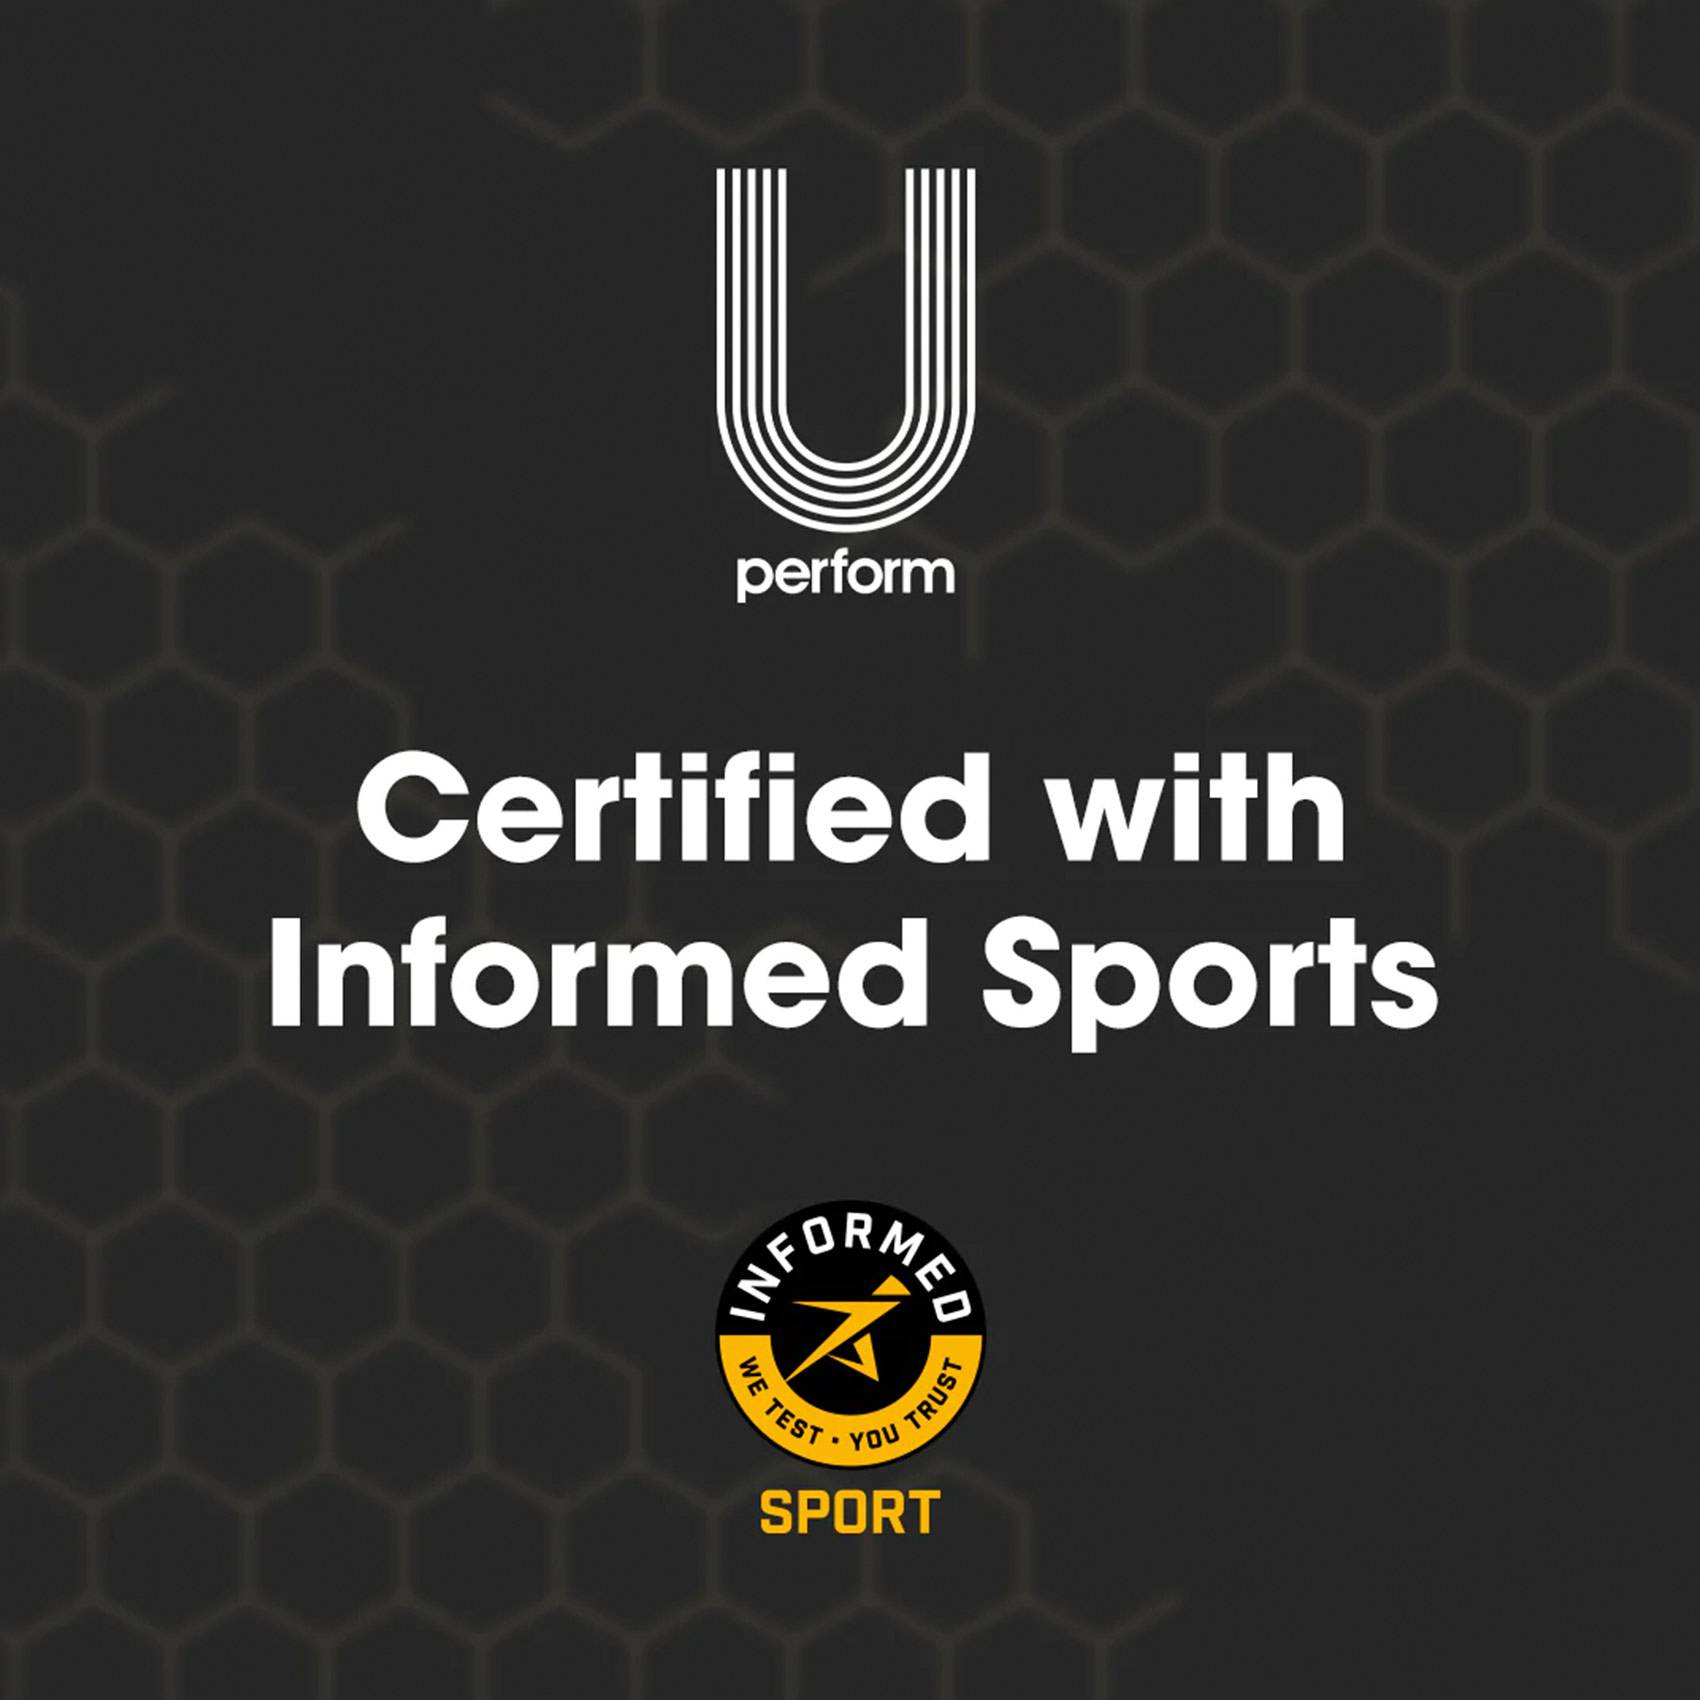 U Perform is certified with Informed Sports to ensure quality and safety